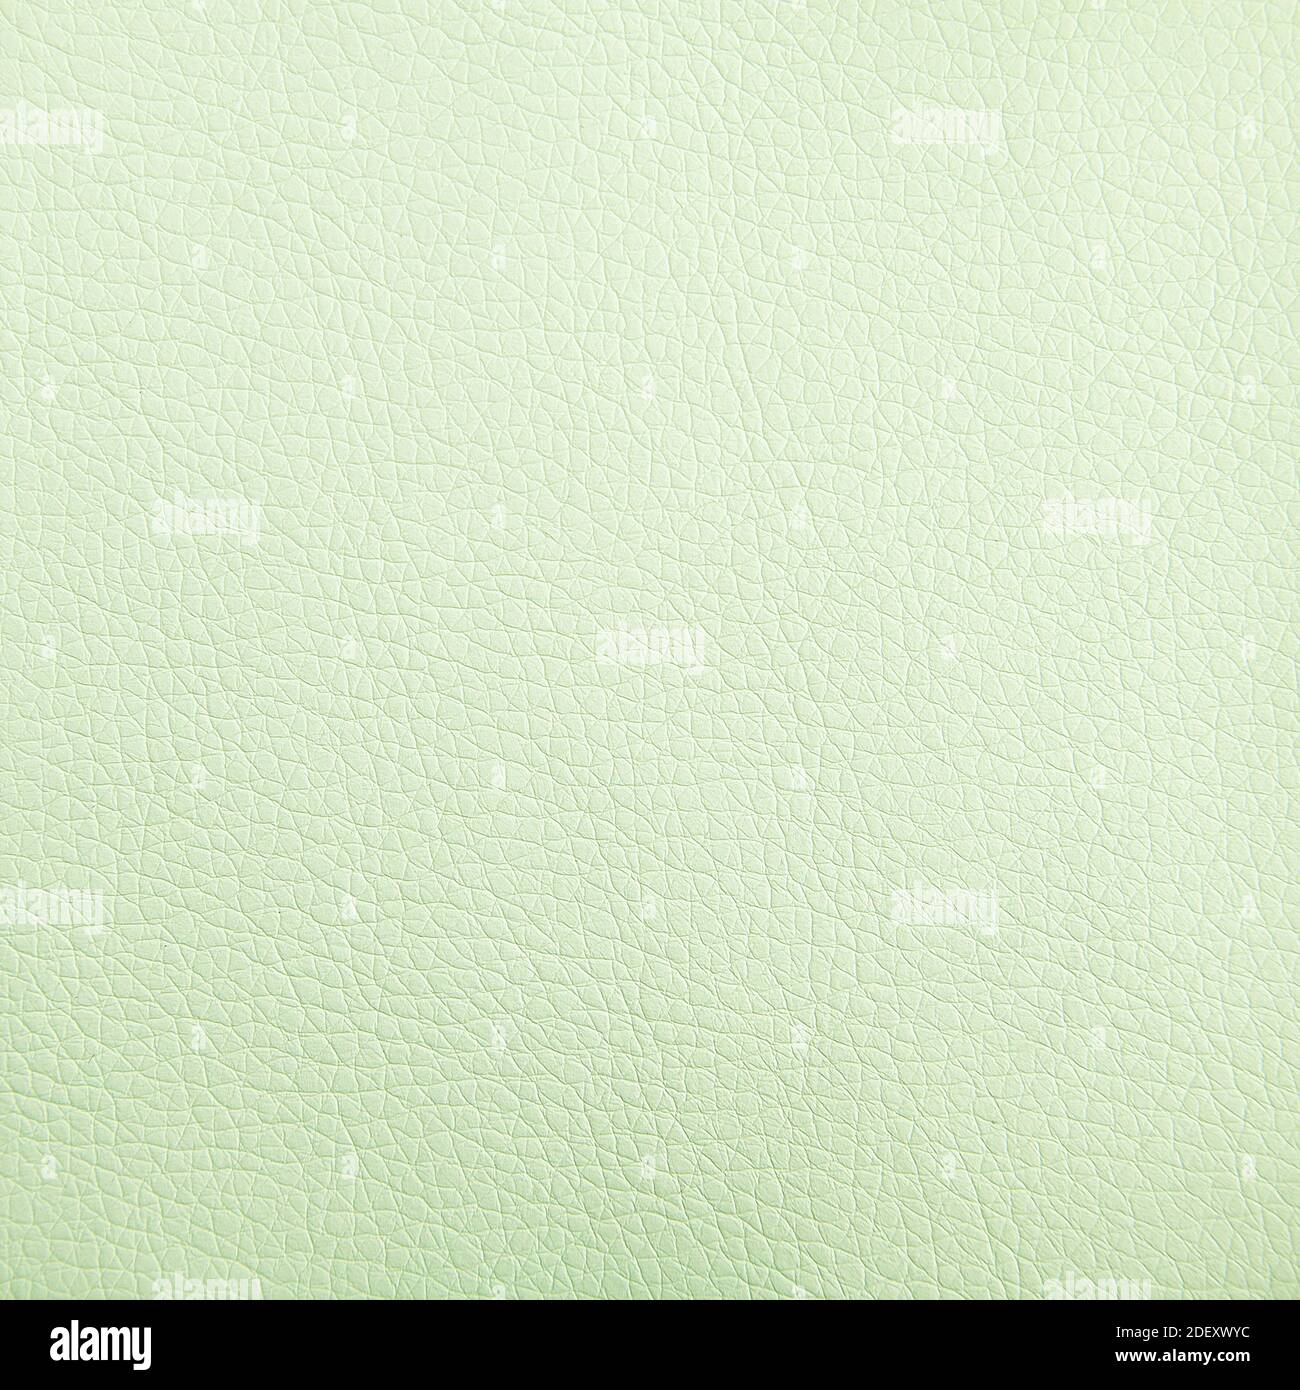 Premium light green leather texture background for decor Stock Photo